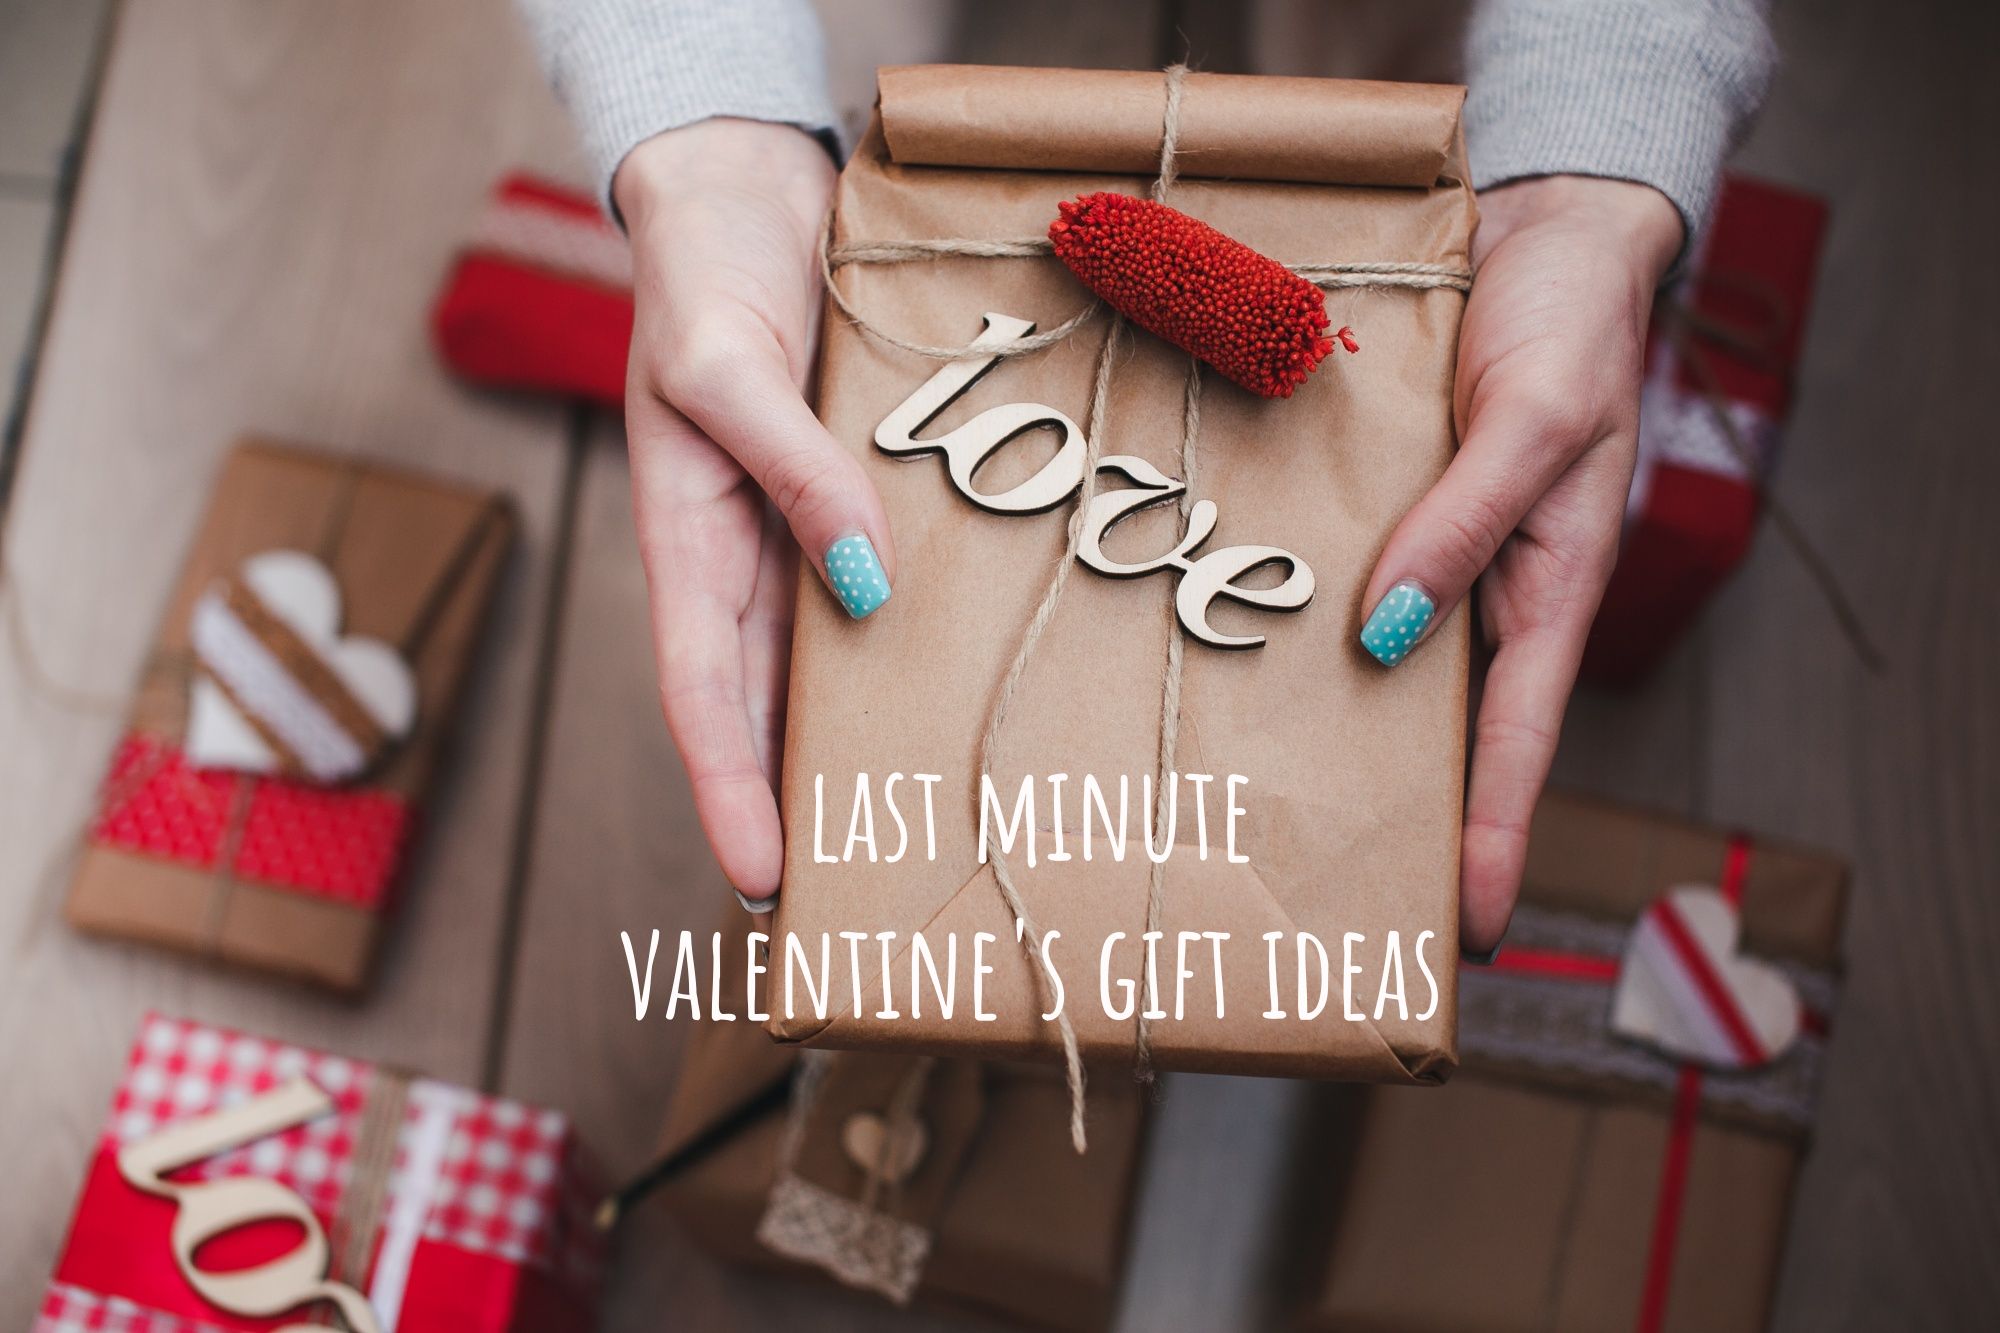 Last-Minute Valentine's Gift Ideas That Will Impress Your Partner